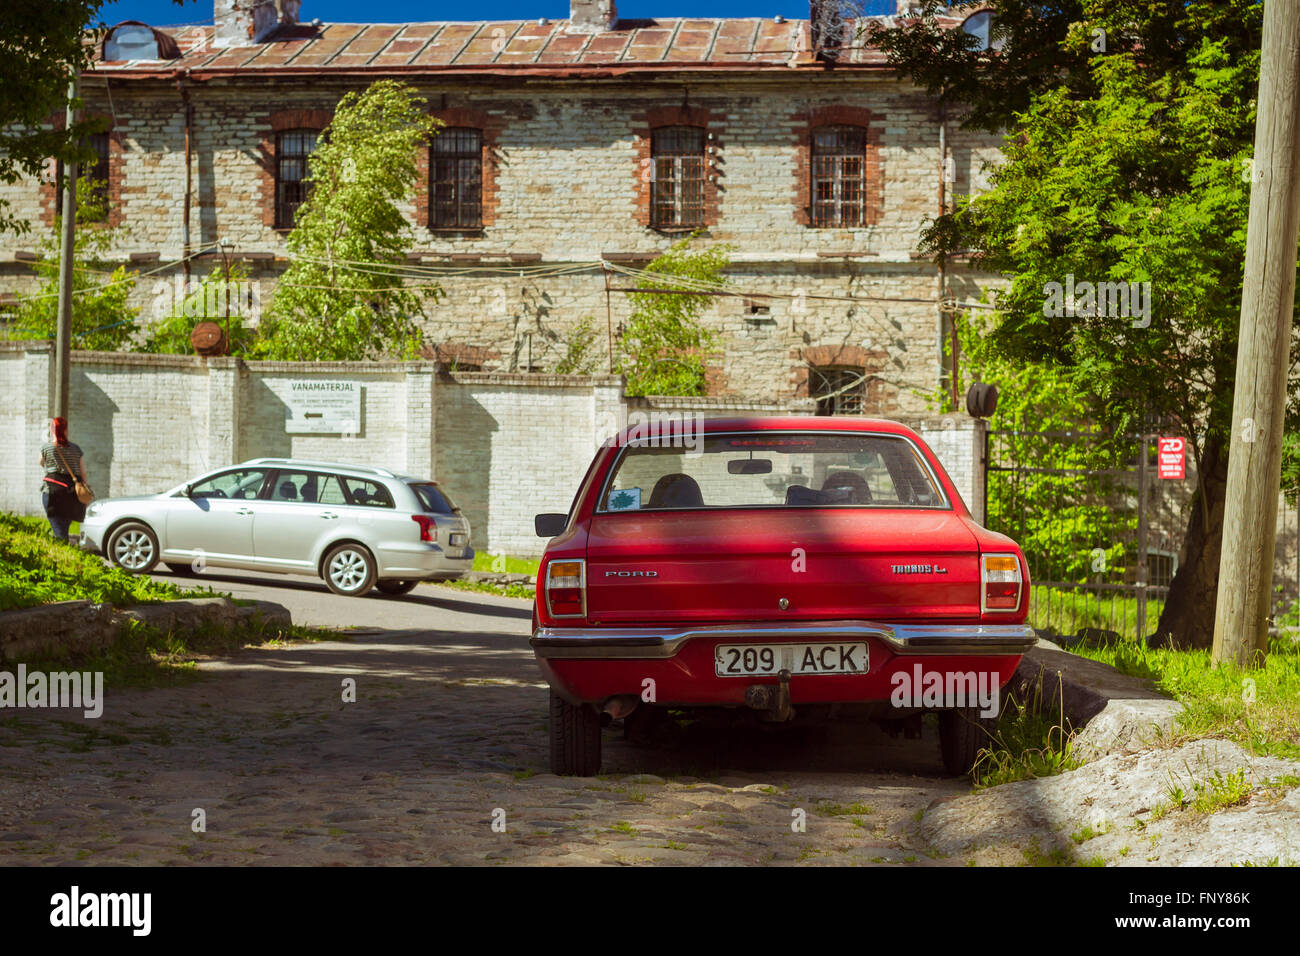 Tallinn, Estonia - Yuni 12, 2015: Red old car Ford Taunus parked on pavement in a deserted street. Sunny summer day Stock Photo